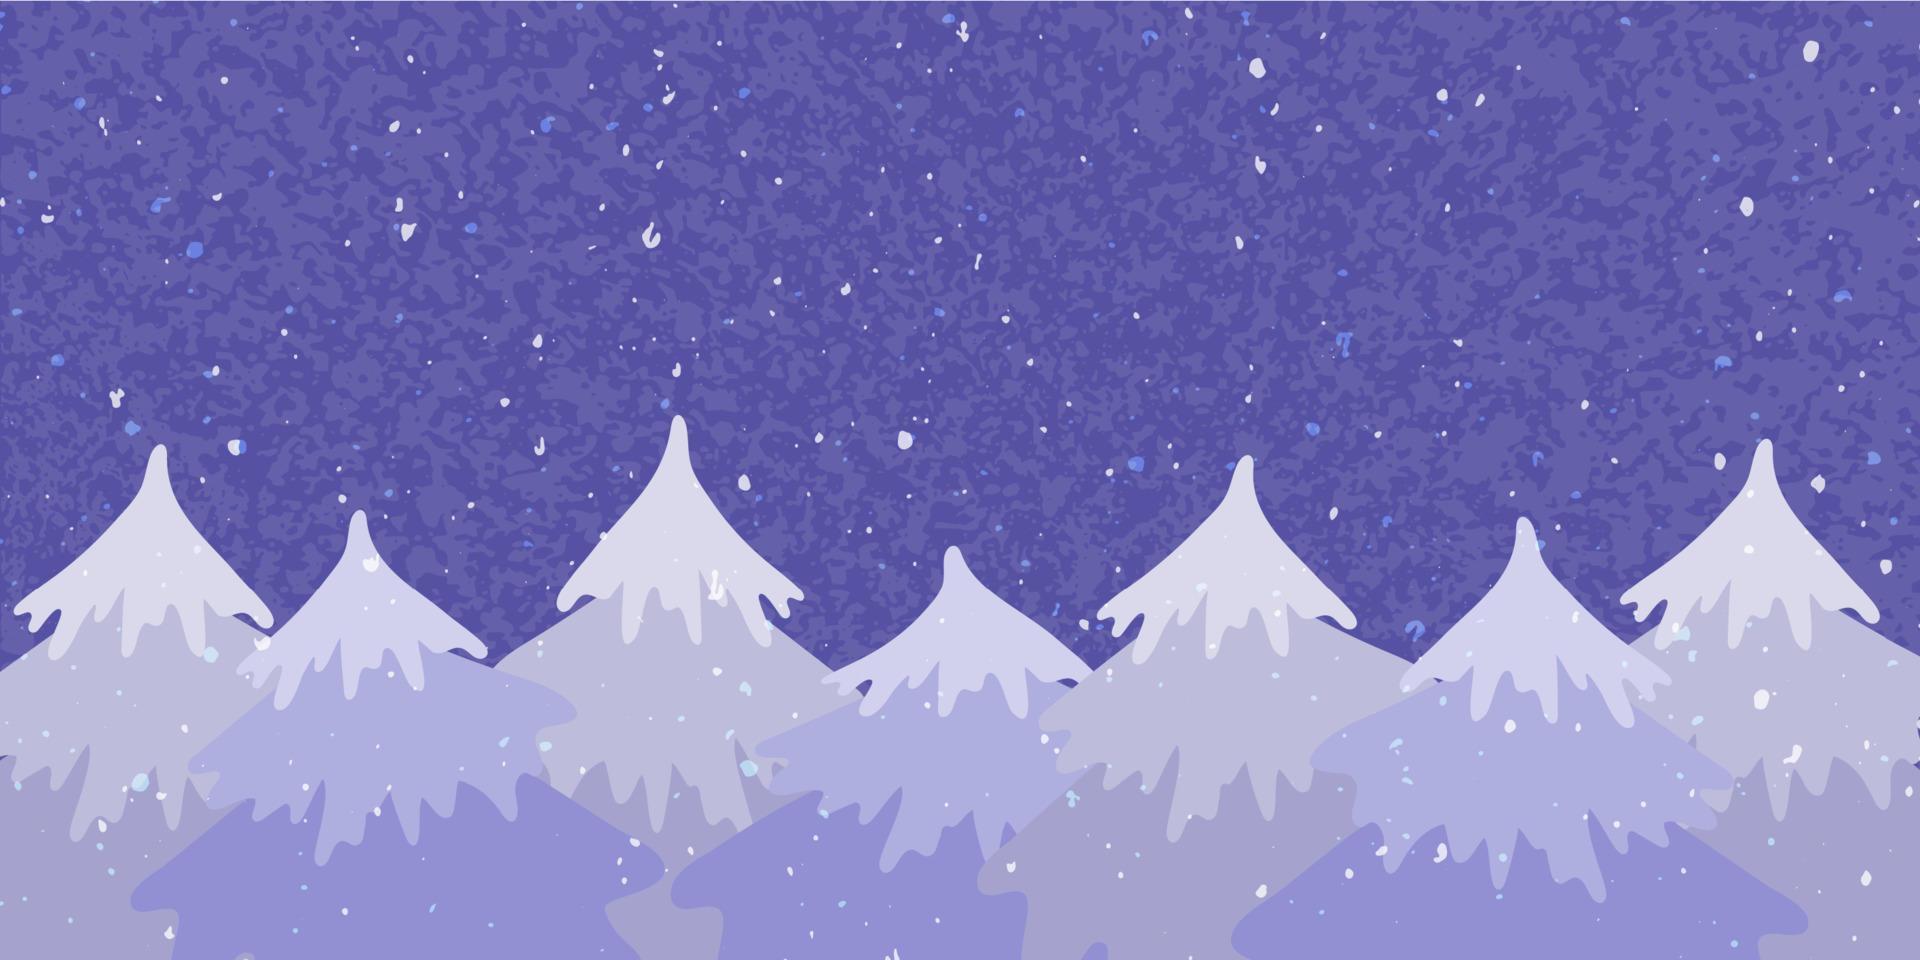 Purple festive background with Christmas trees and snowfall. Cozy Christmas scene with an empty space for your message. Vector illustration.